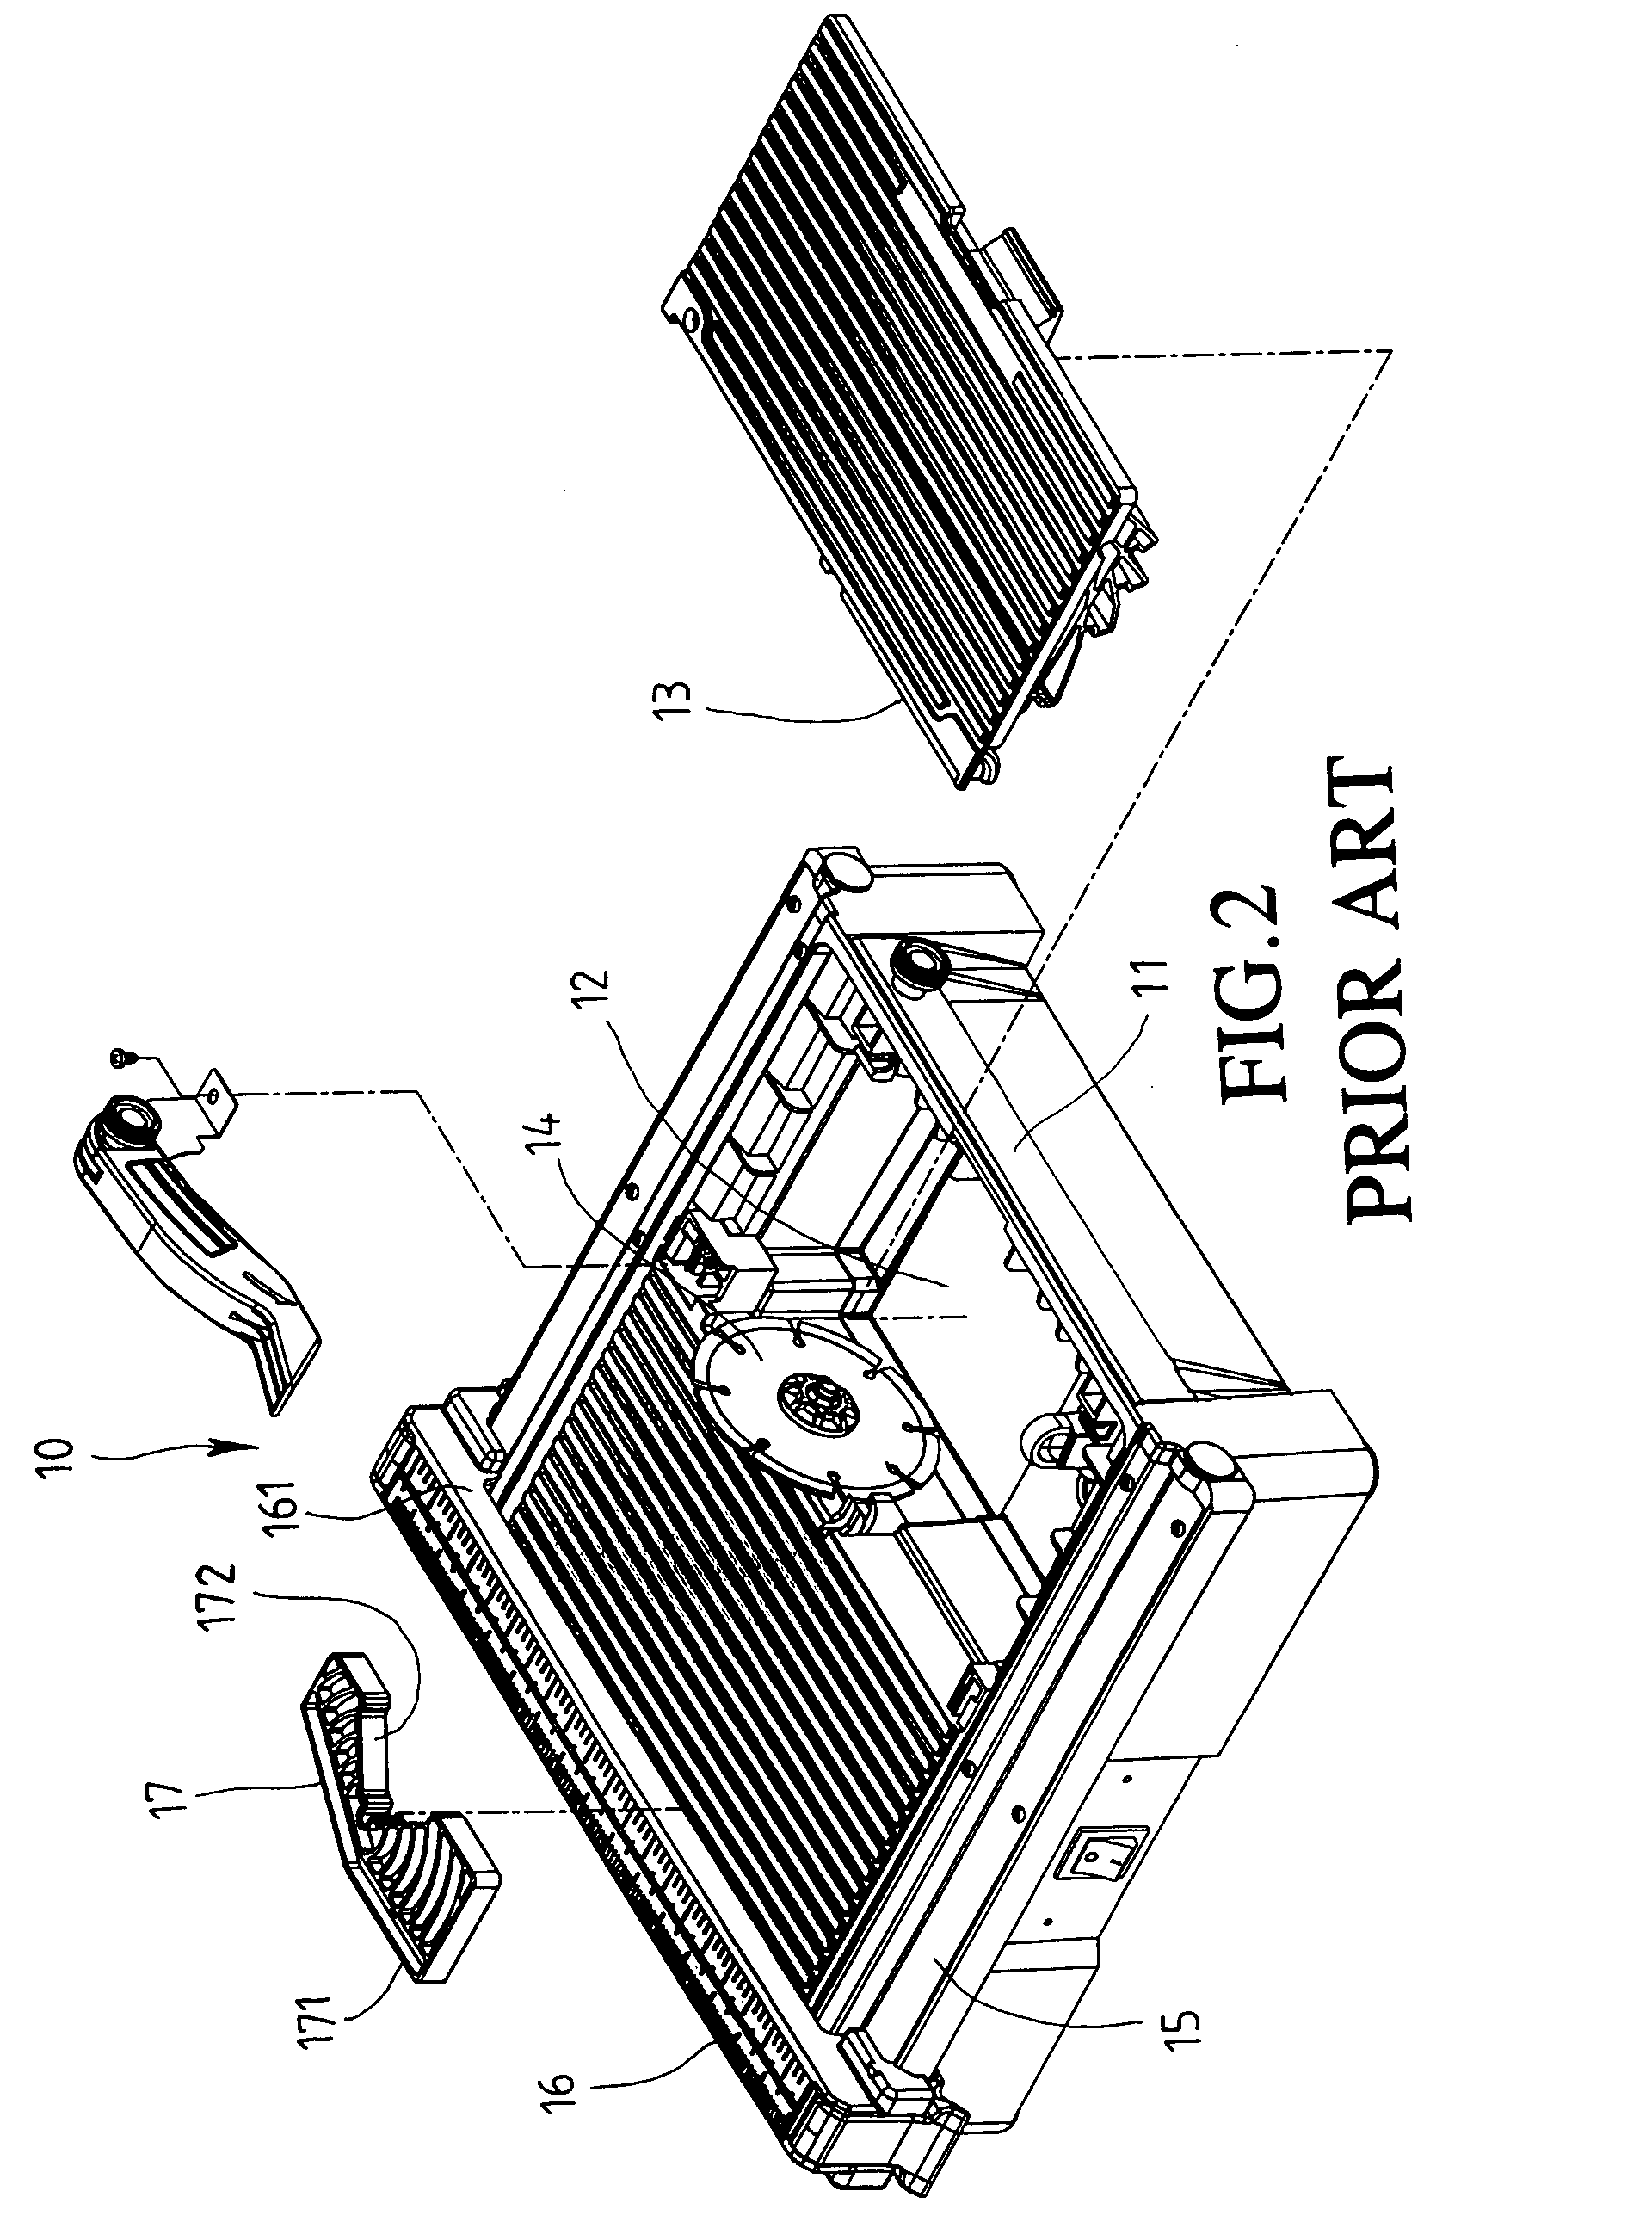 Tile positioning device for a tile cutting machine